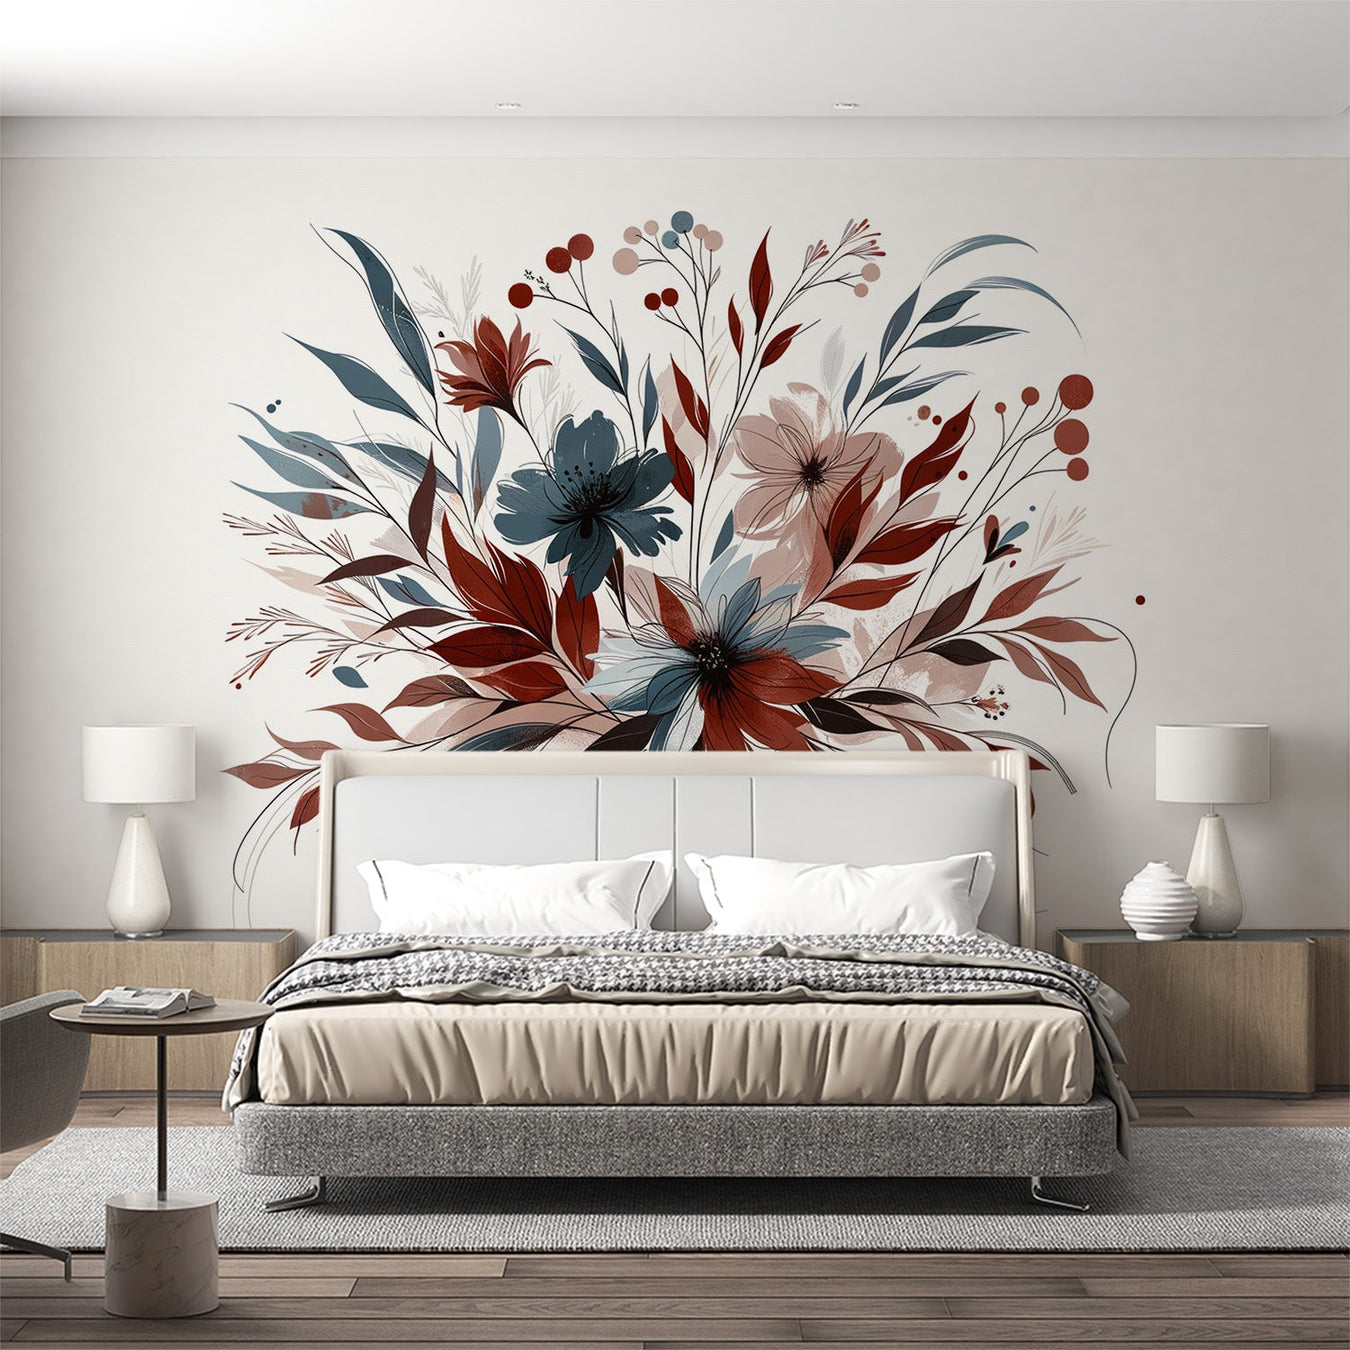 Black and White Foliage Mural Wallpaper